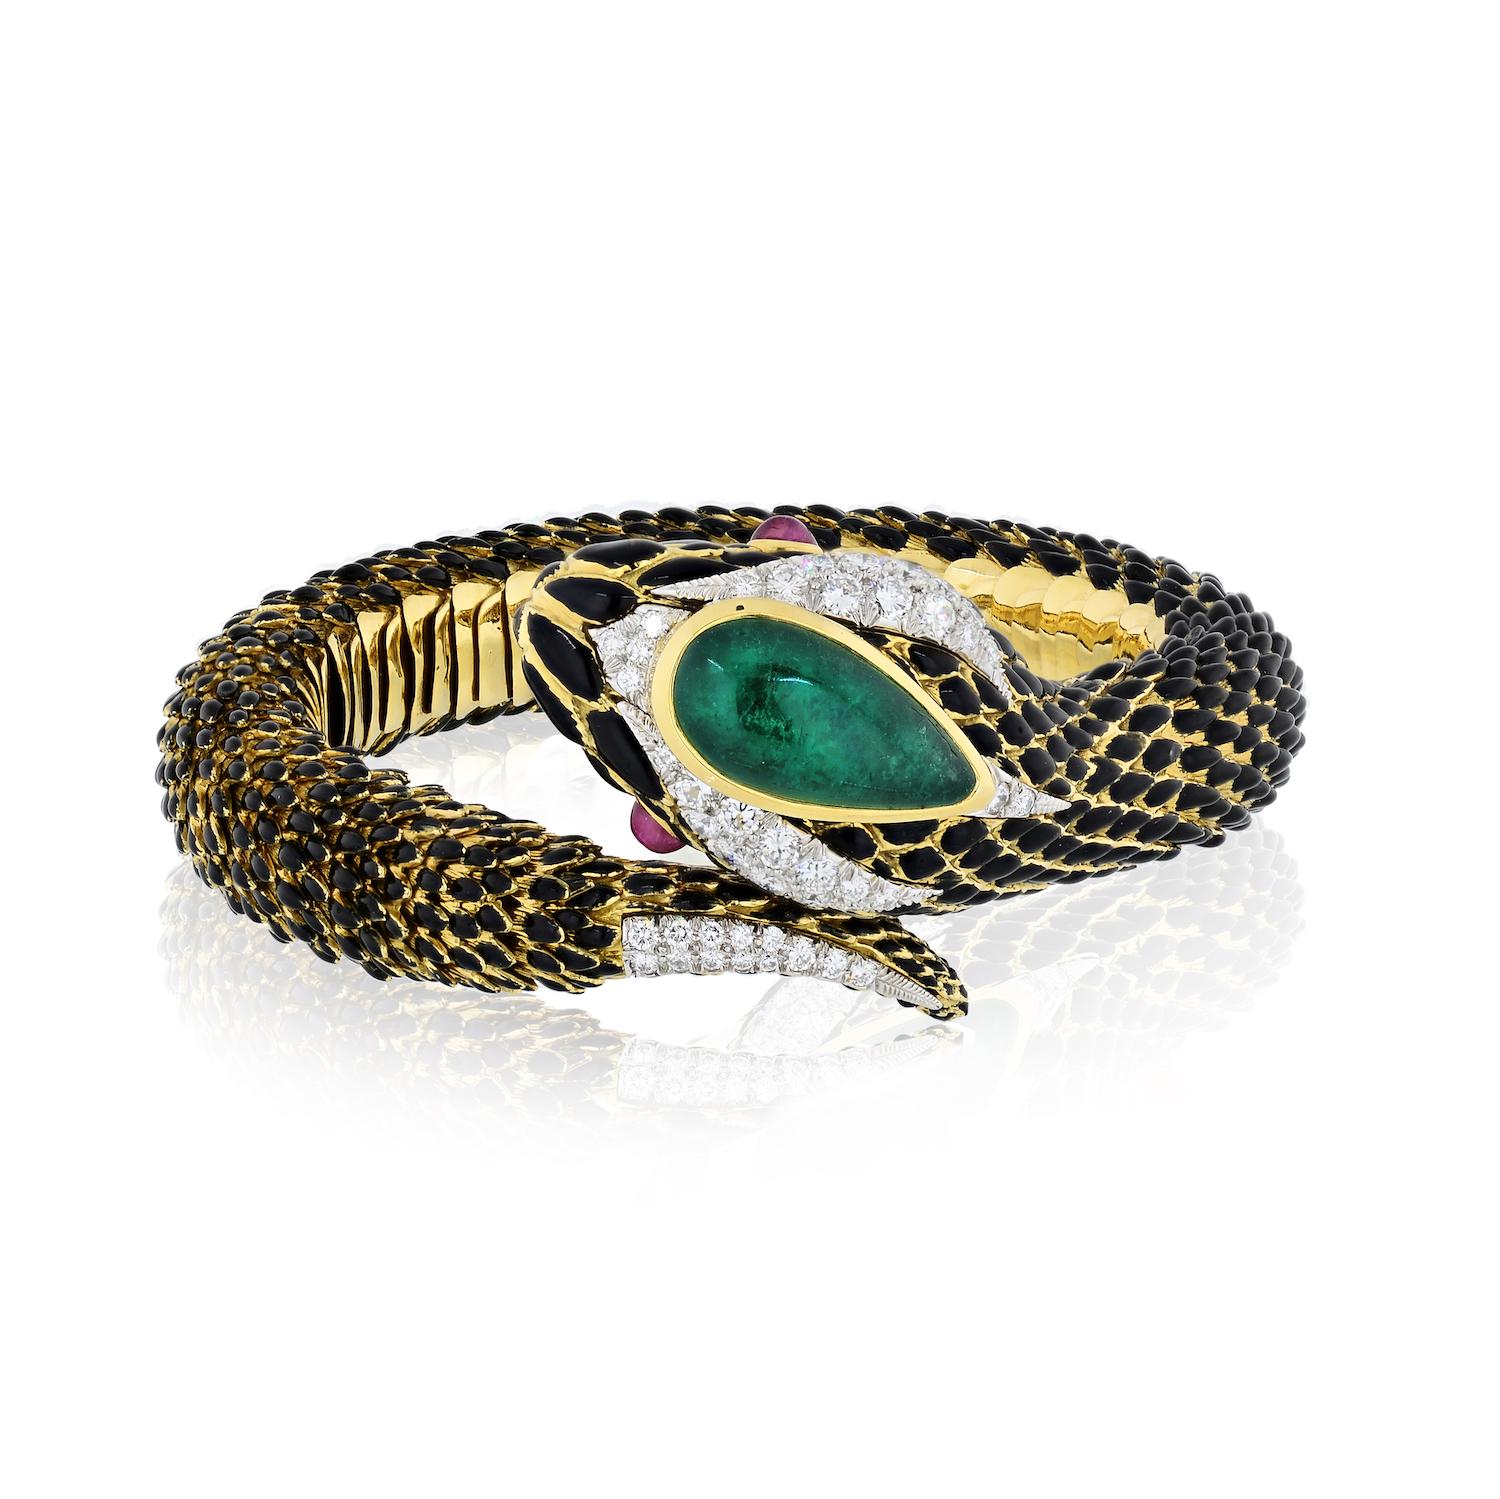 David Webb 18K yellow gold bracelet crafted in a form of a snake with a beautiful green cabochon emerald atop her head. Red ruby cabochon eyes and lovely round brilliant cut diamonds framing her head and tail add a touch of sparkle for an extra